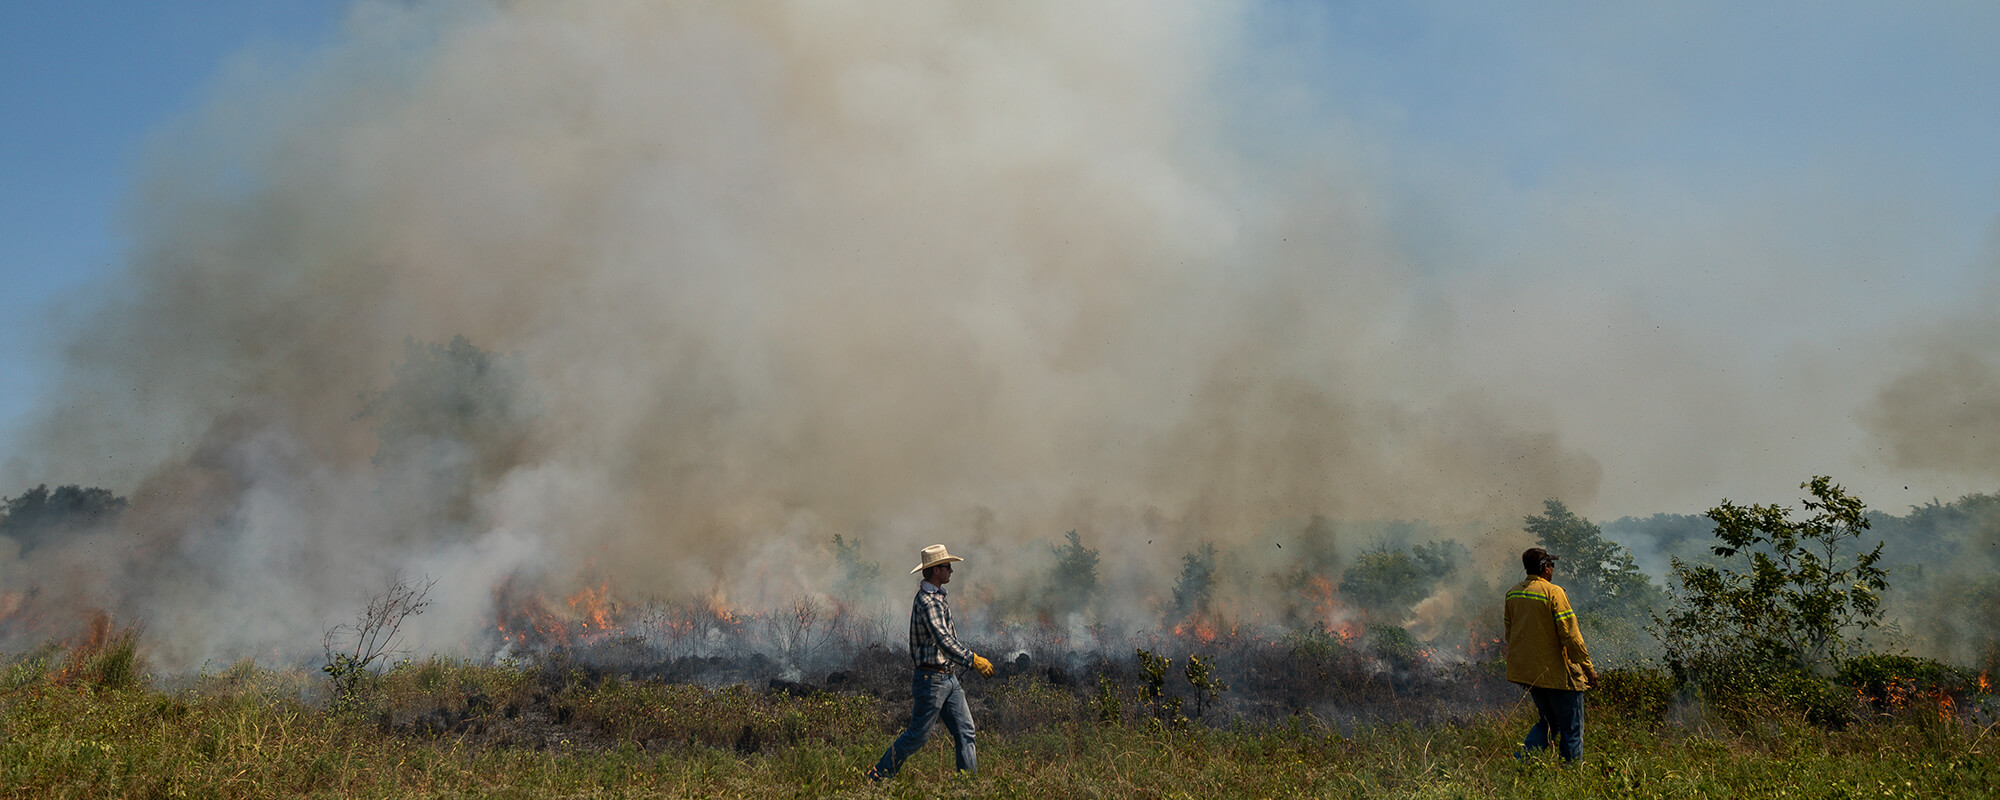 Ranchers conducting a prescribed burn look on as smoke rises from the fire.